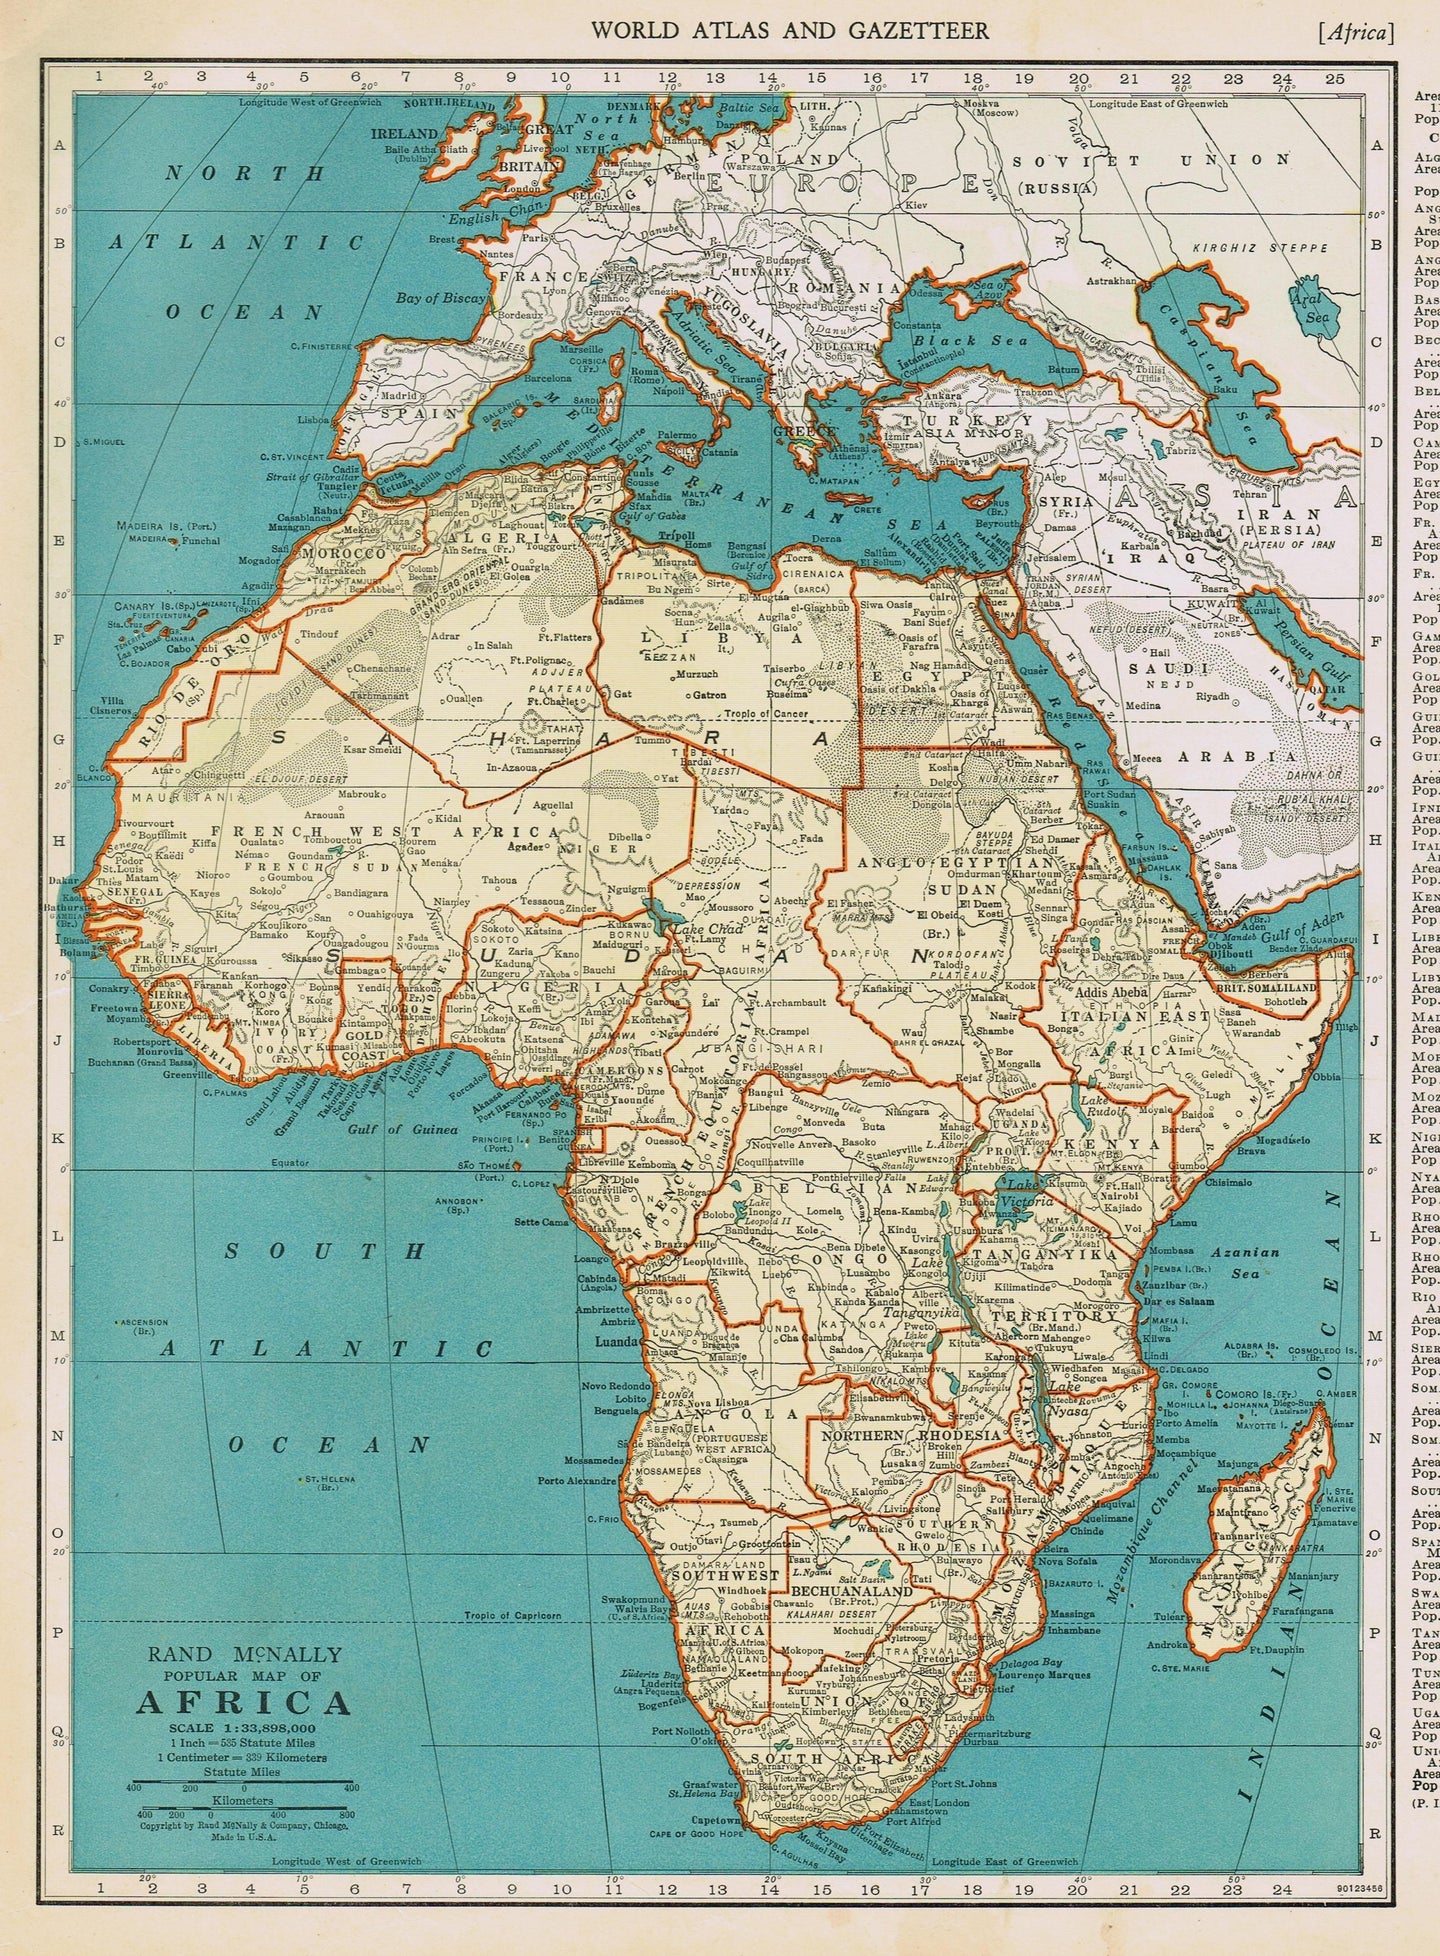 Genuine-Antique-Map-Popular-Map-of-Africa-1940-Rand-McNally-Maps-Of-Antiquity